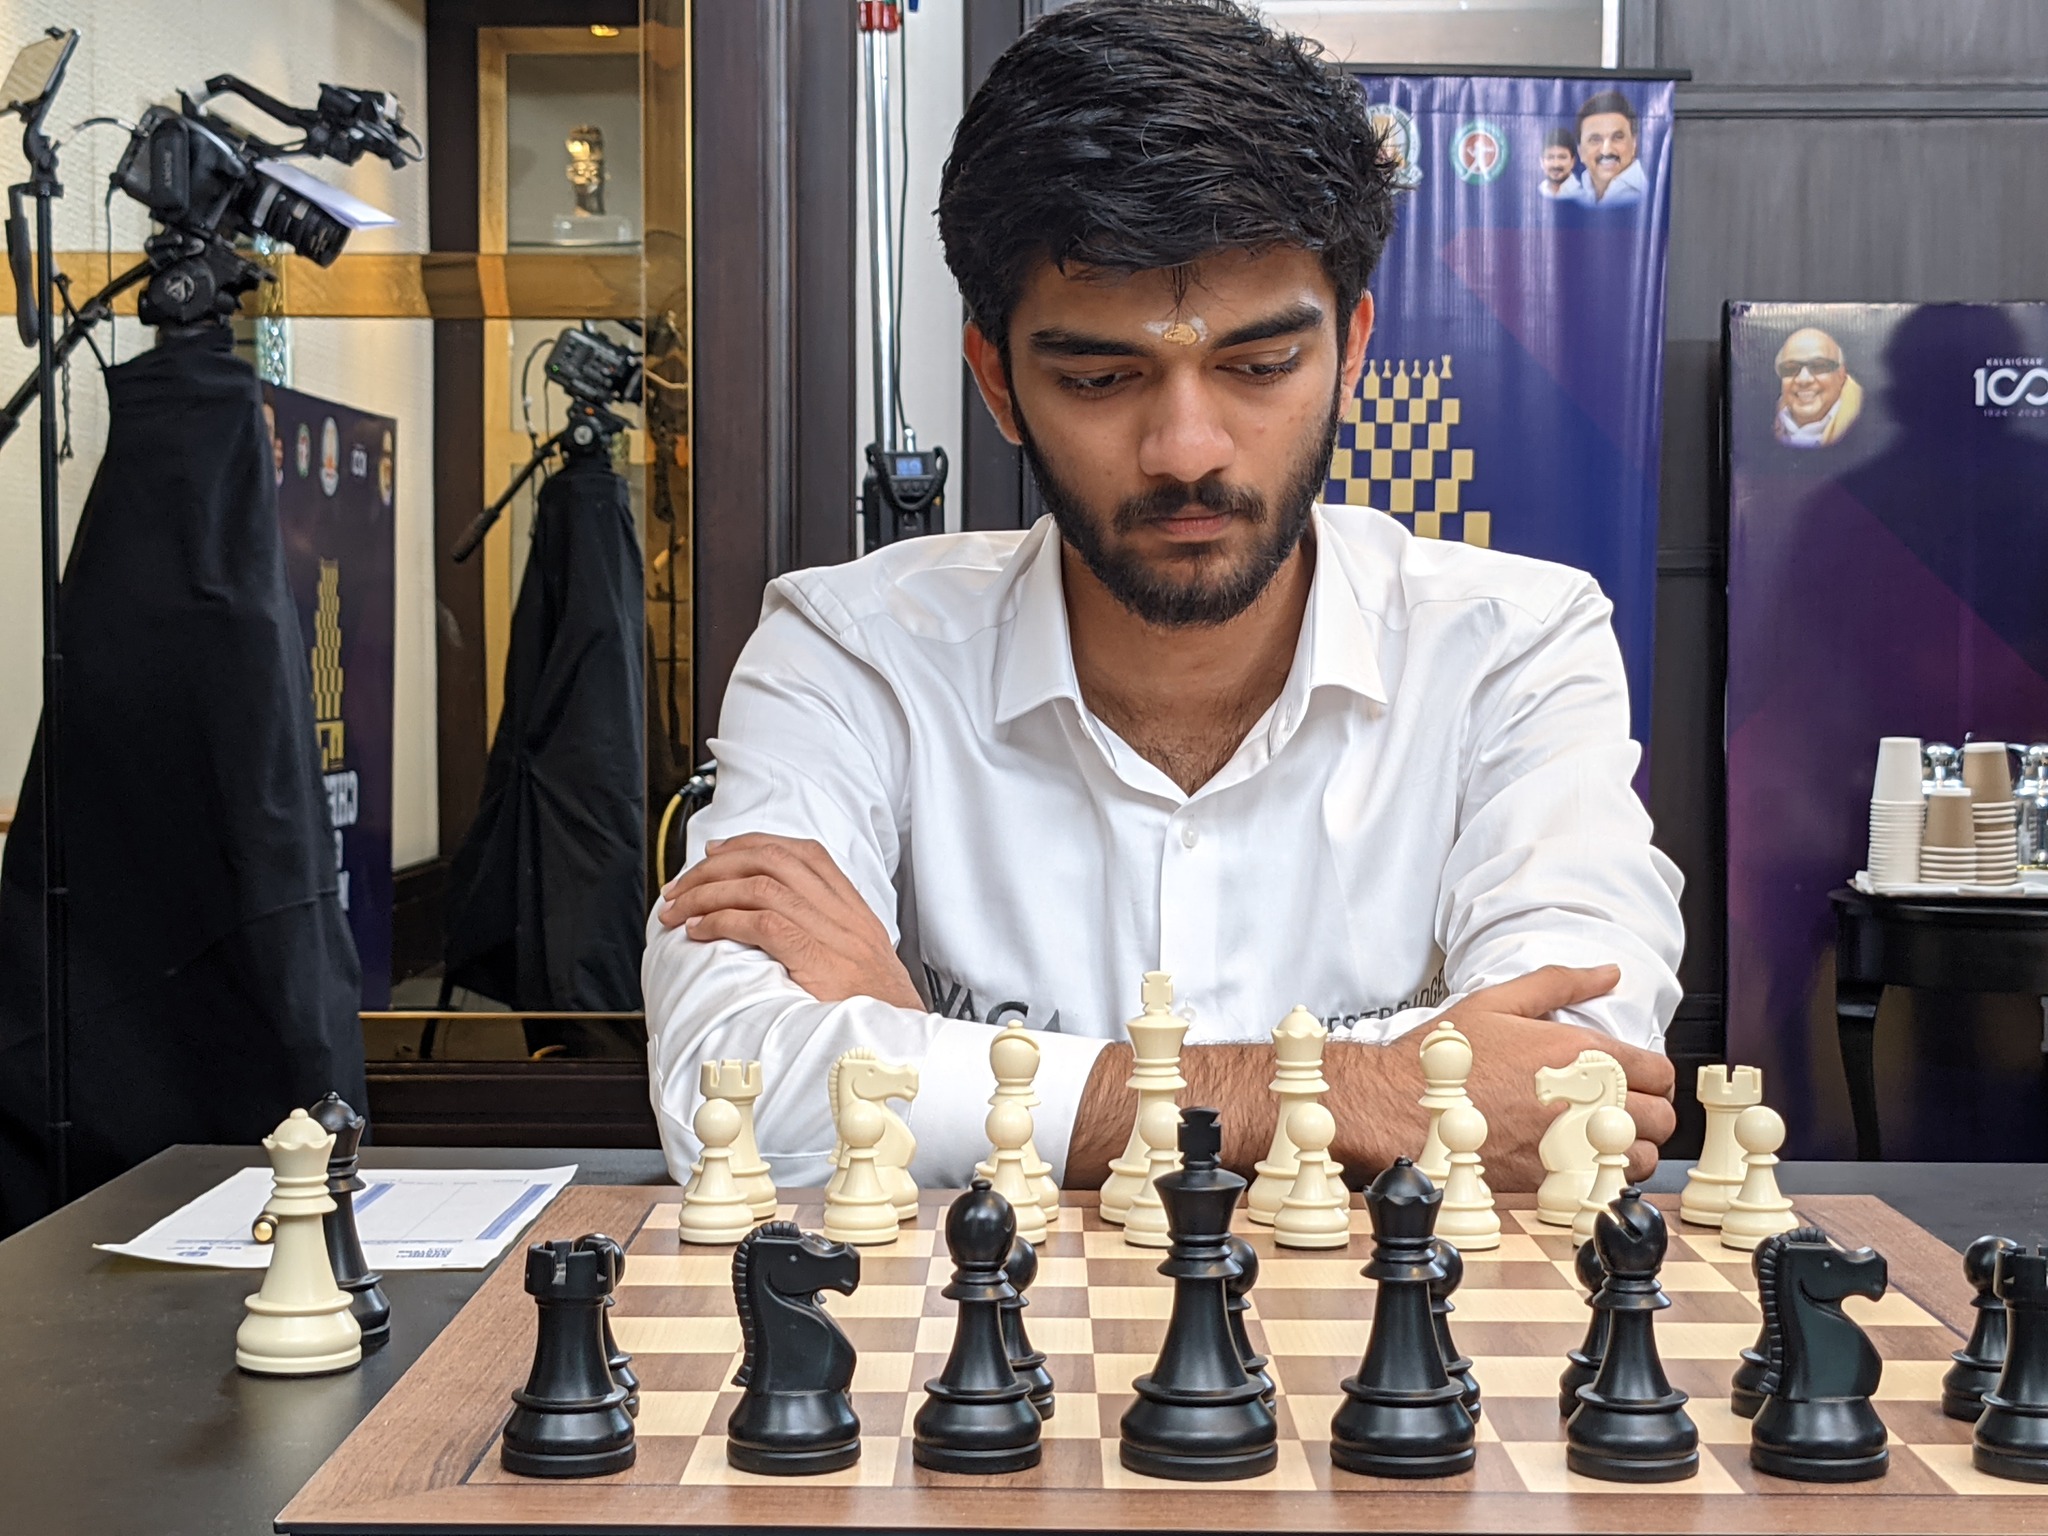 ChessBase India on Instagram: We have built the ChessBase India shop  carefully over a period of 5 years. As on today it is one of the biggest  chess shops in the world